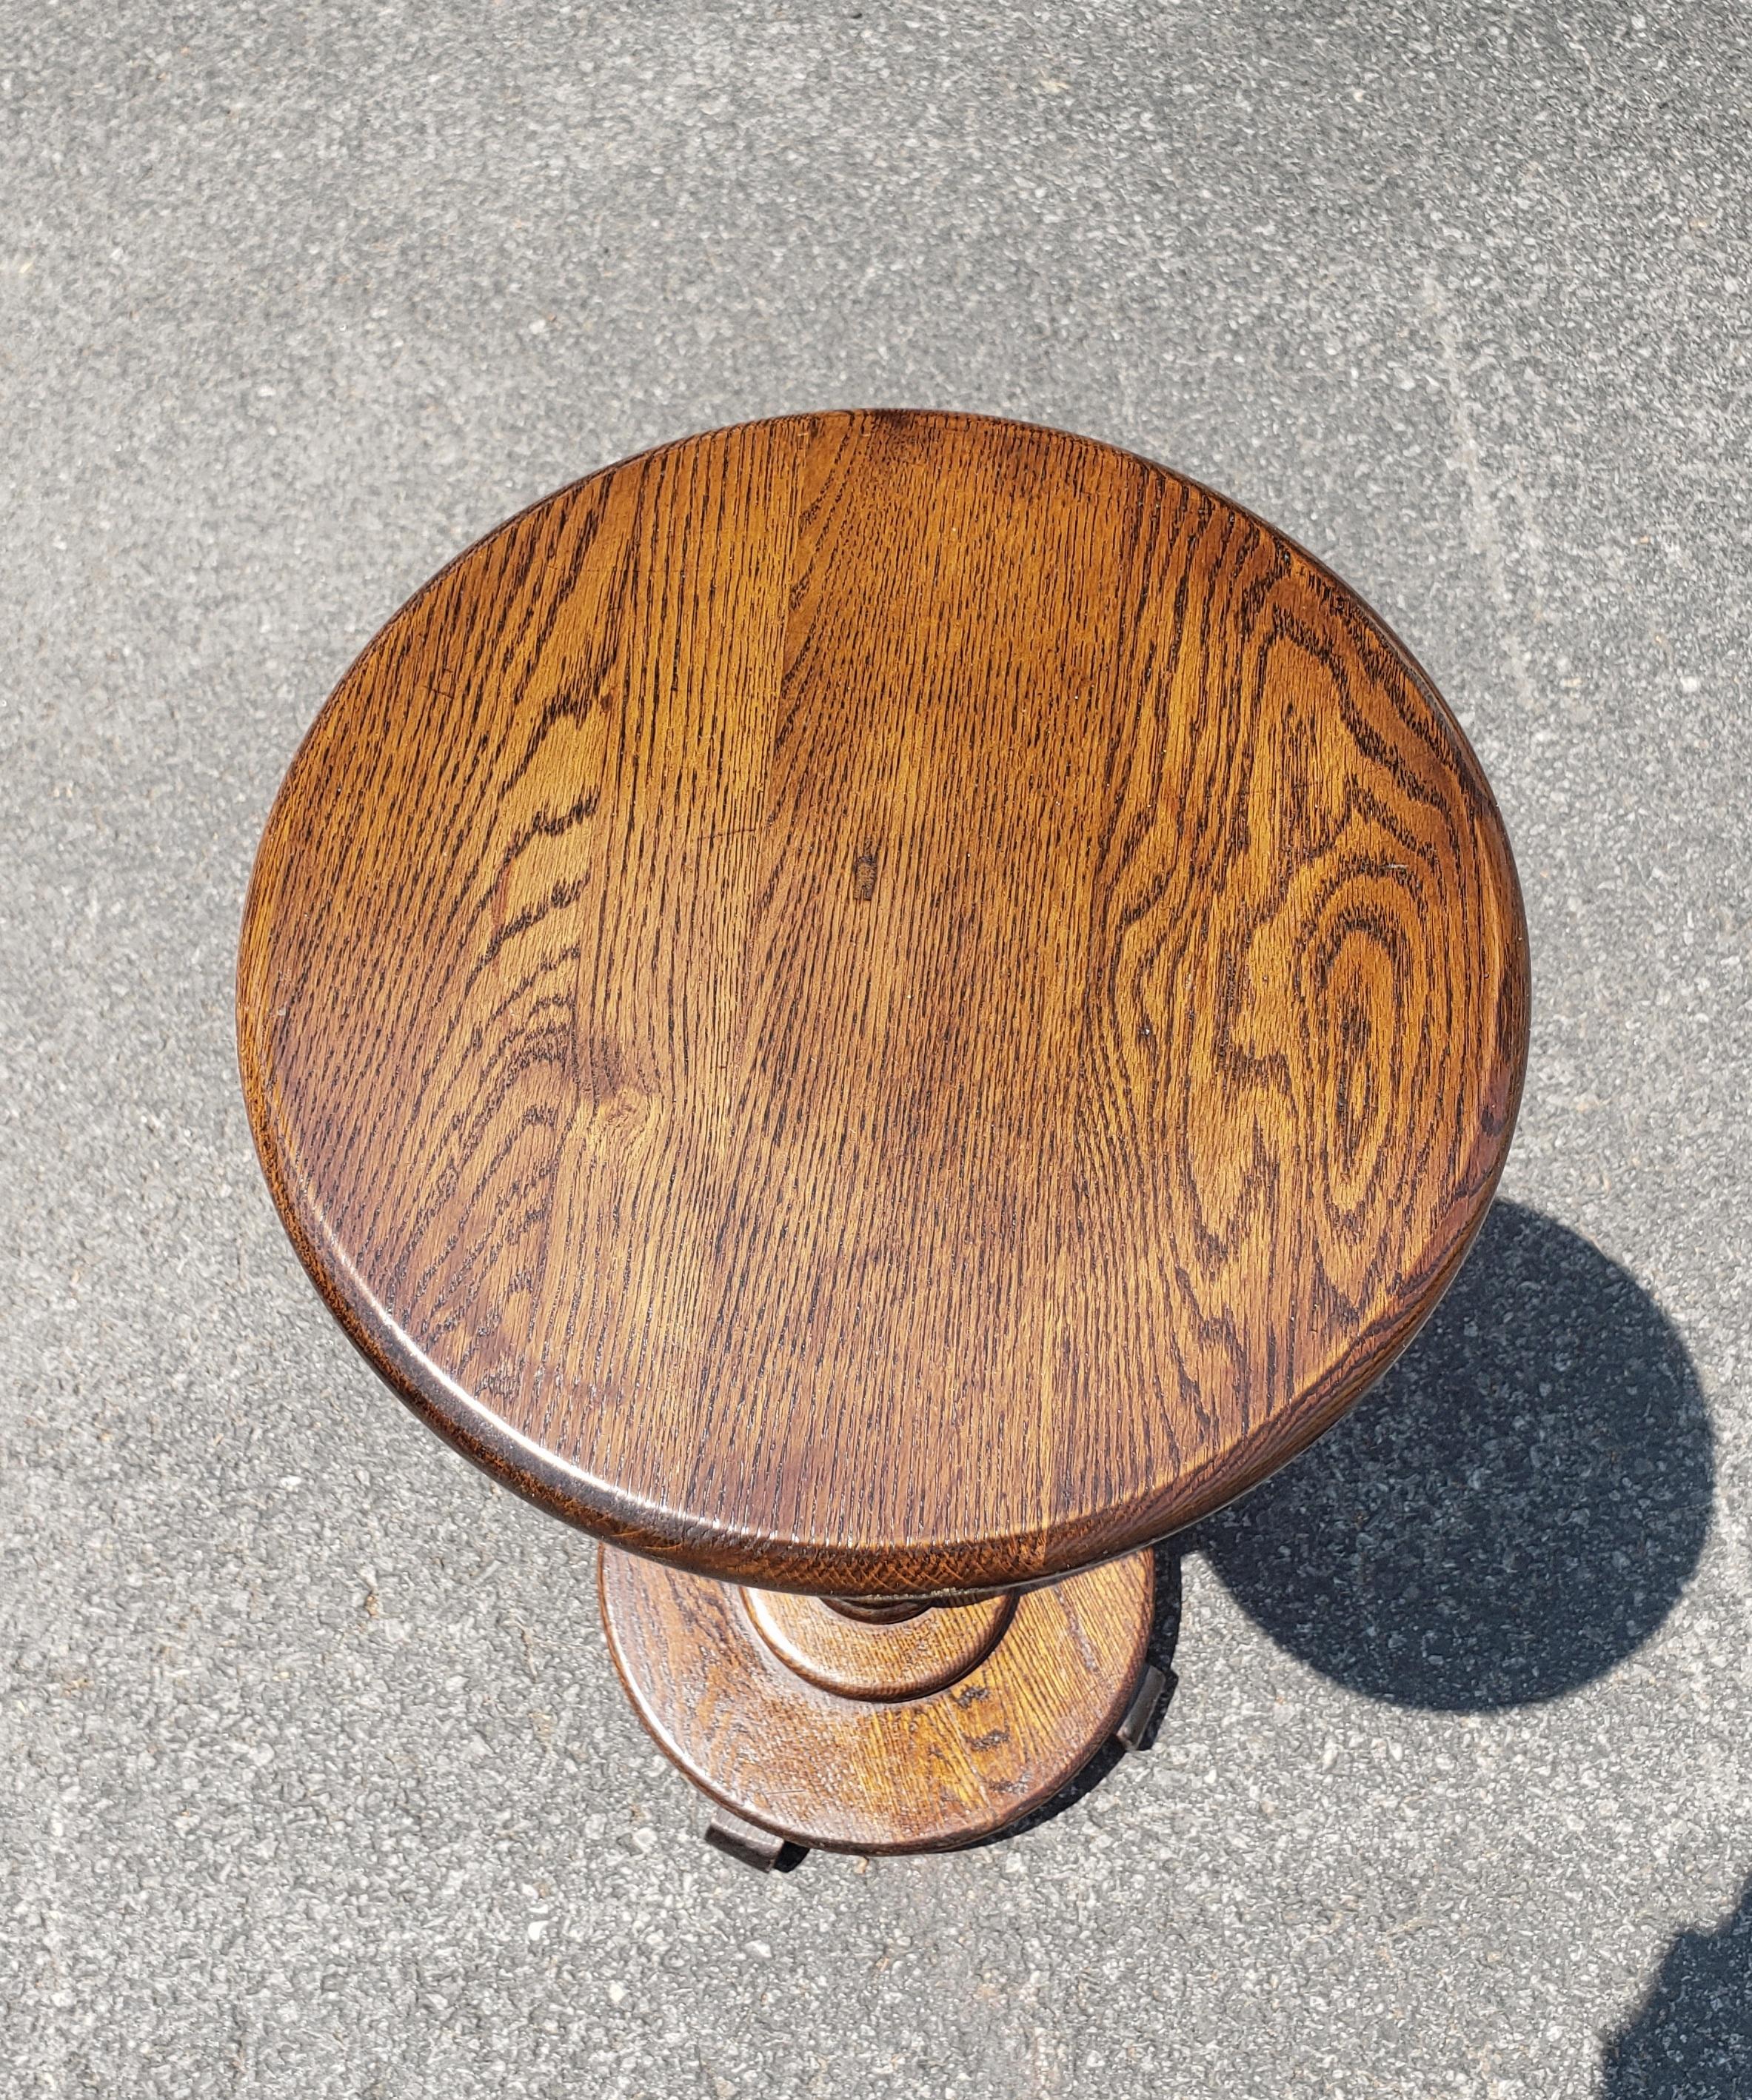 Midcentury American Classical Solid Oak Pedestal or Plant Stand In Good Condition For Sale In Germantown, MD